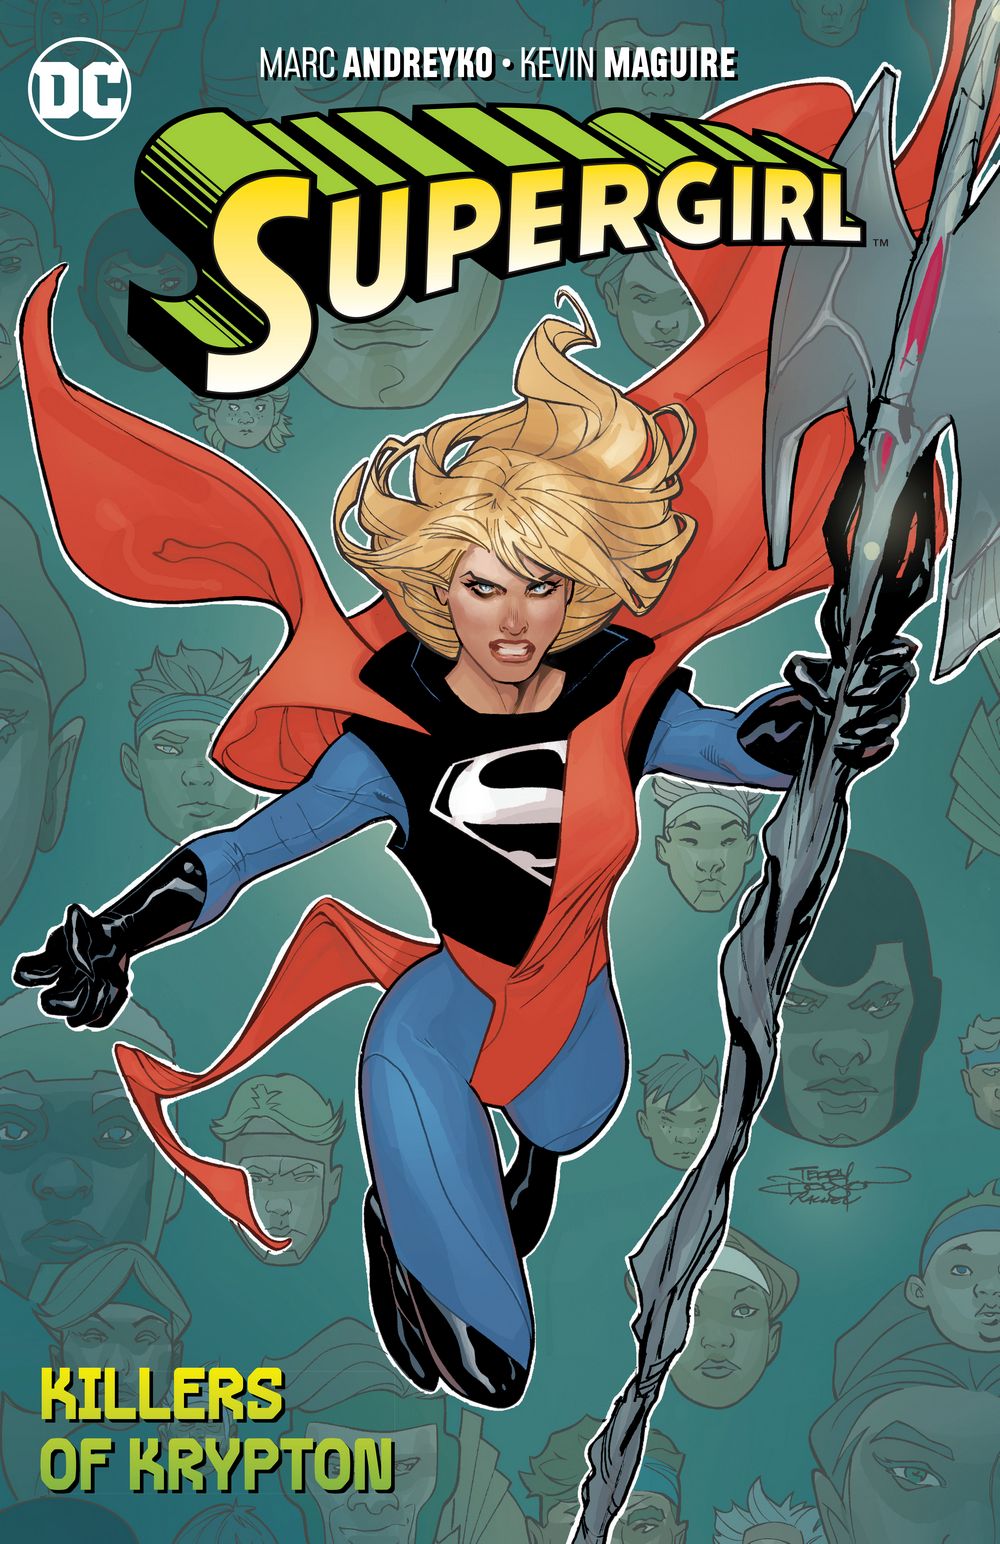 Supergirl By Andreyko TP VOL 01 the Killers of Krypton